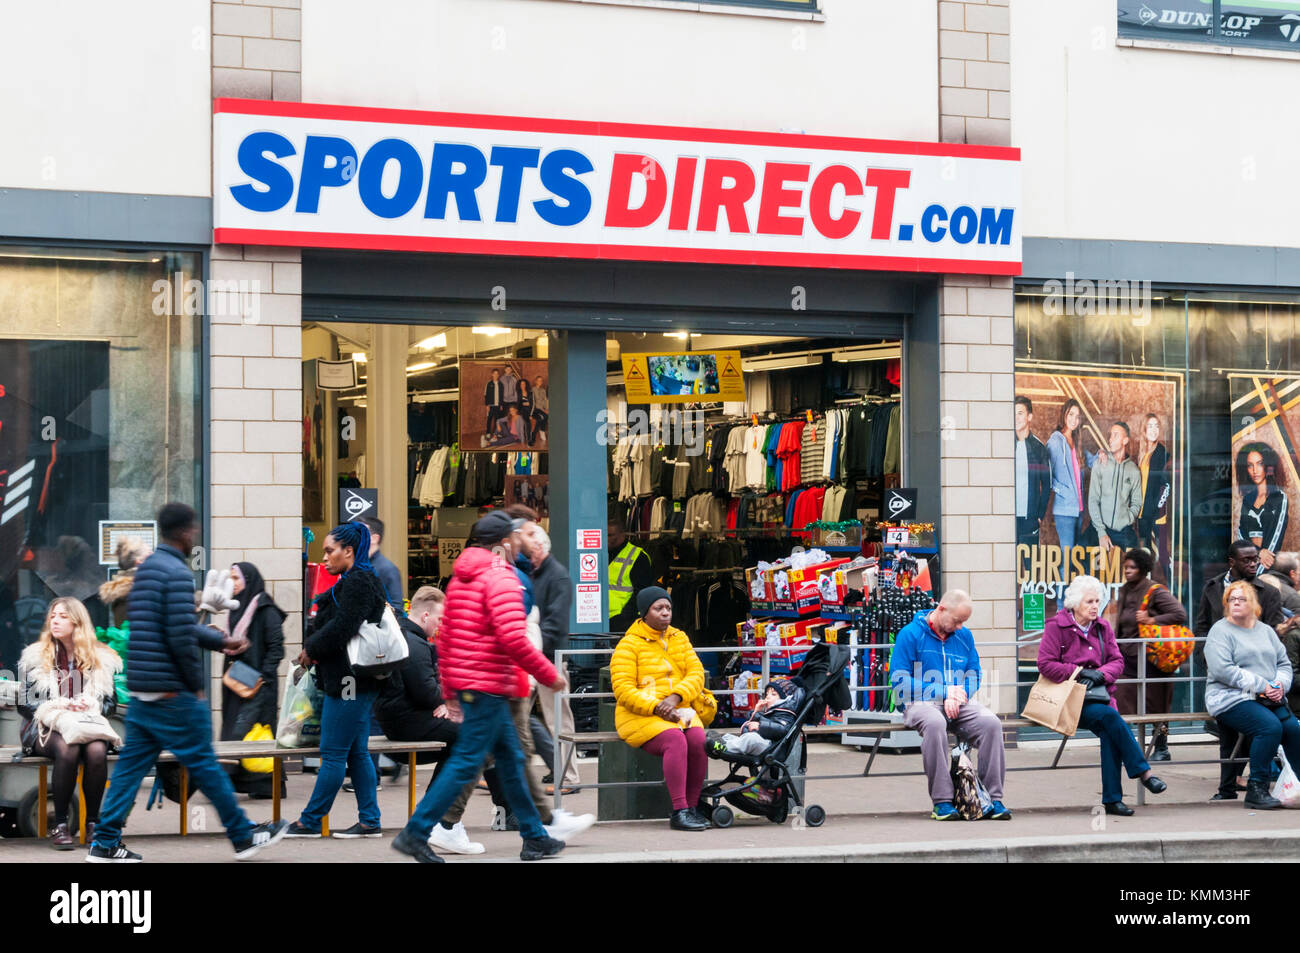 A branch of Sports Direct or sportsdirect.com sportswear shop in Bromley High Street. Stock Photo